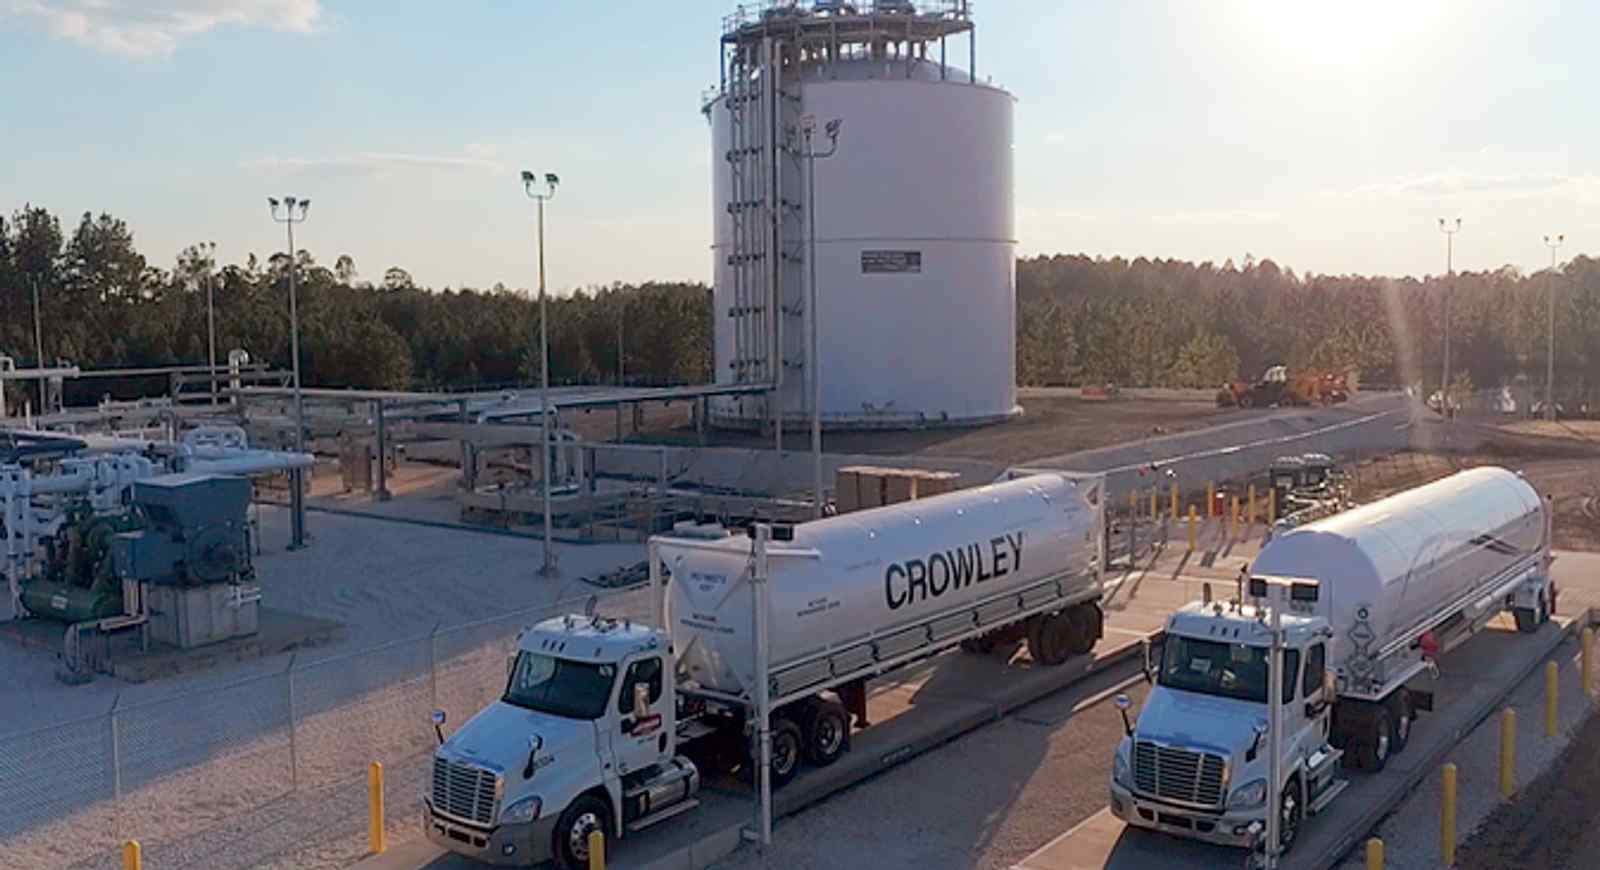 Crowley Loads First LNG into ISO Tank Container at Eagle LNG Partners’ New Plant